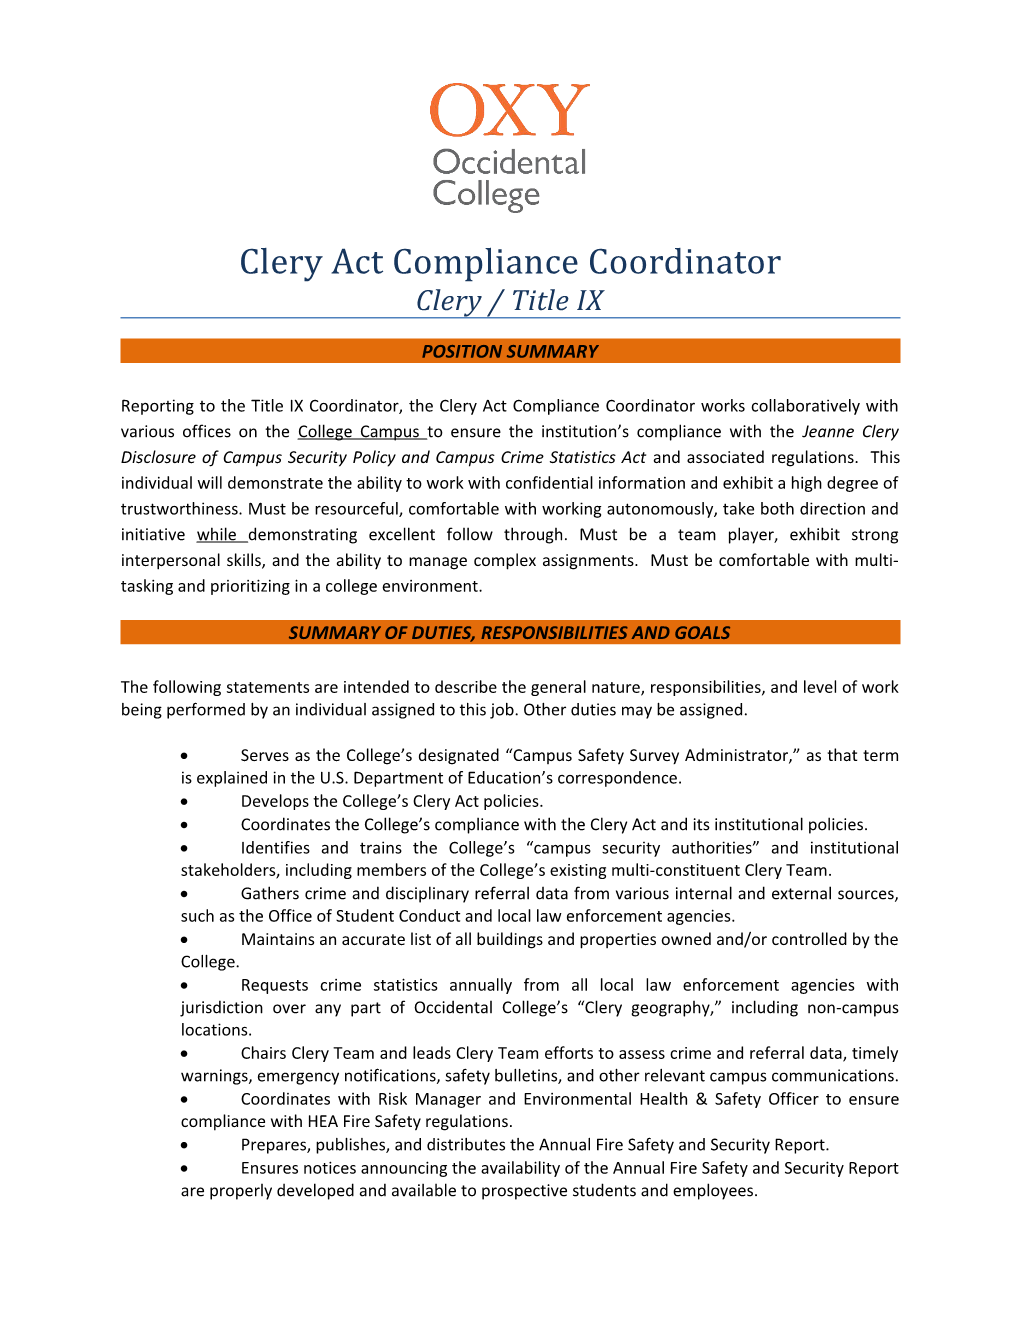 Clery Act Compliance Coordinator